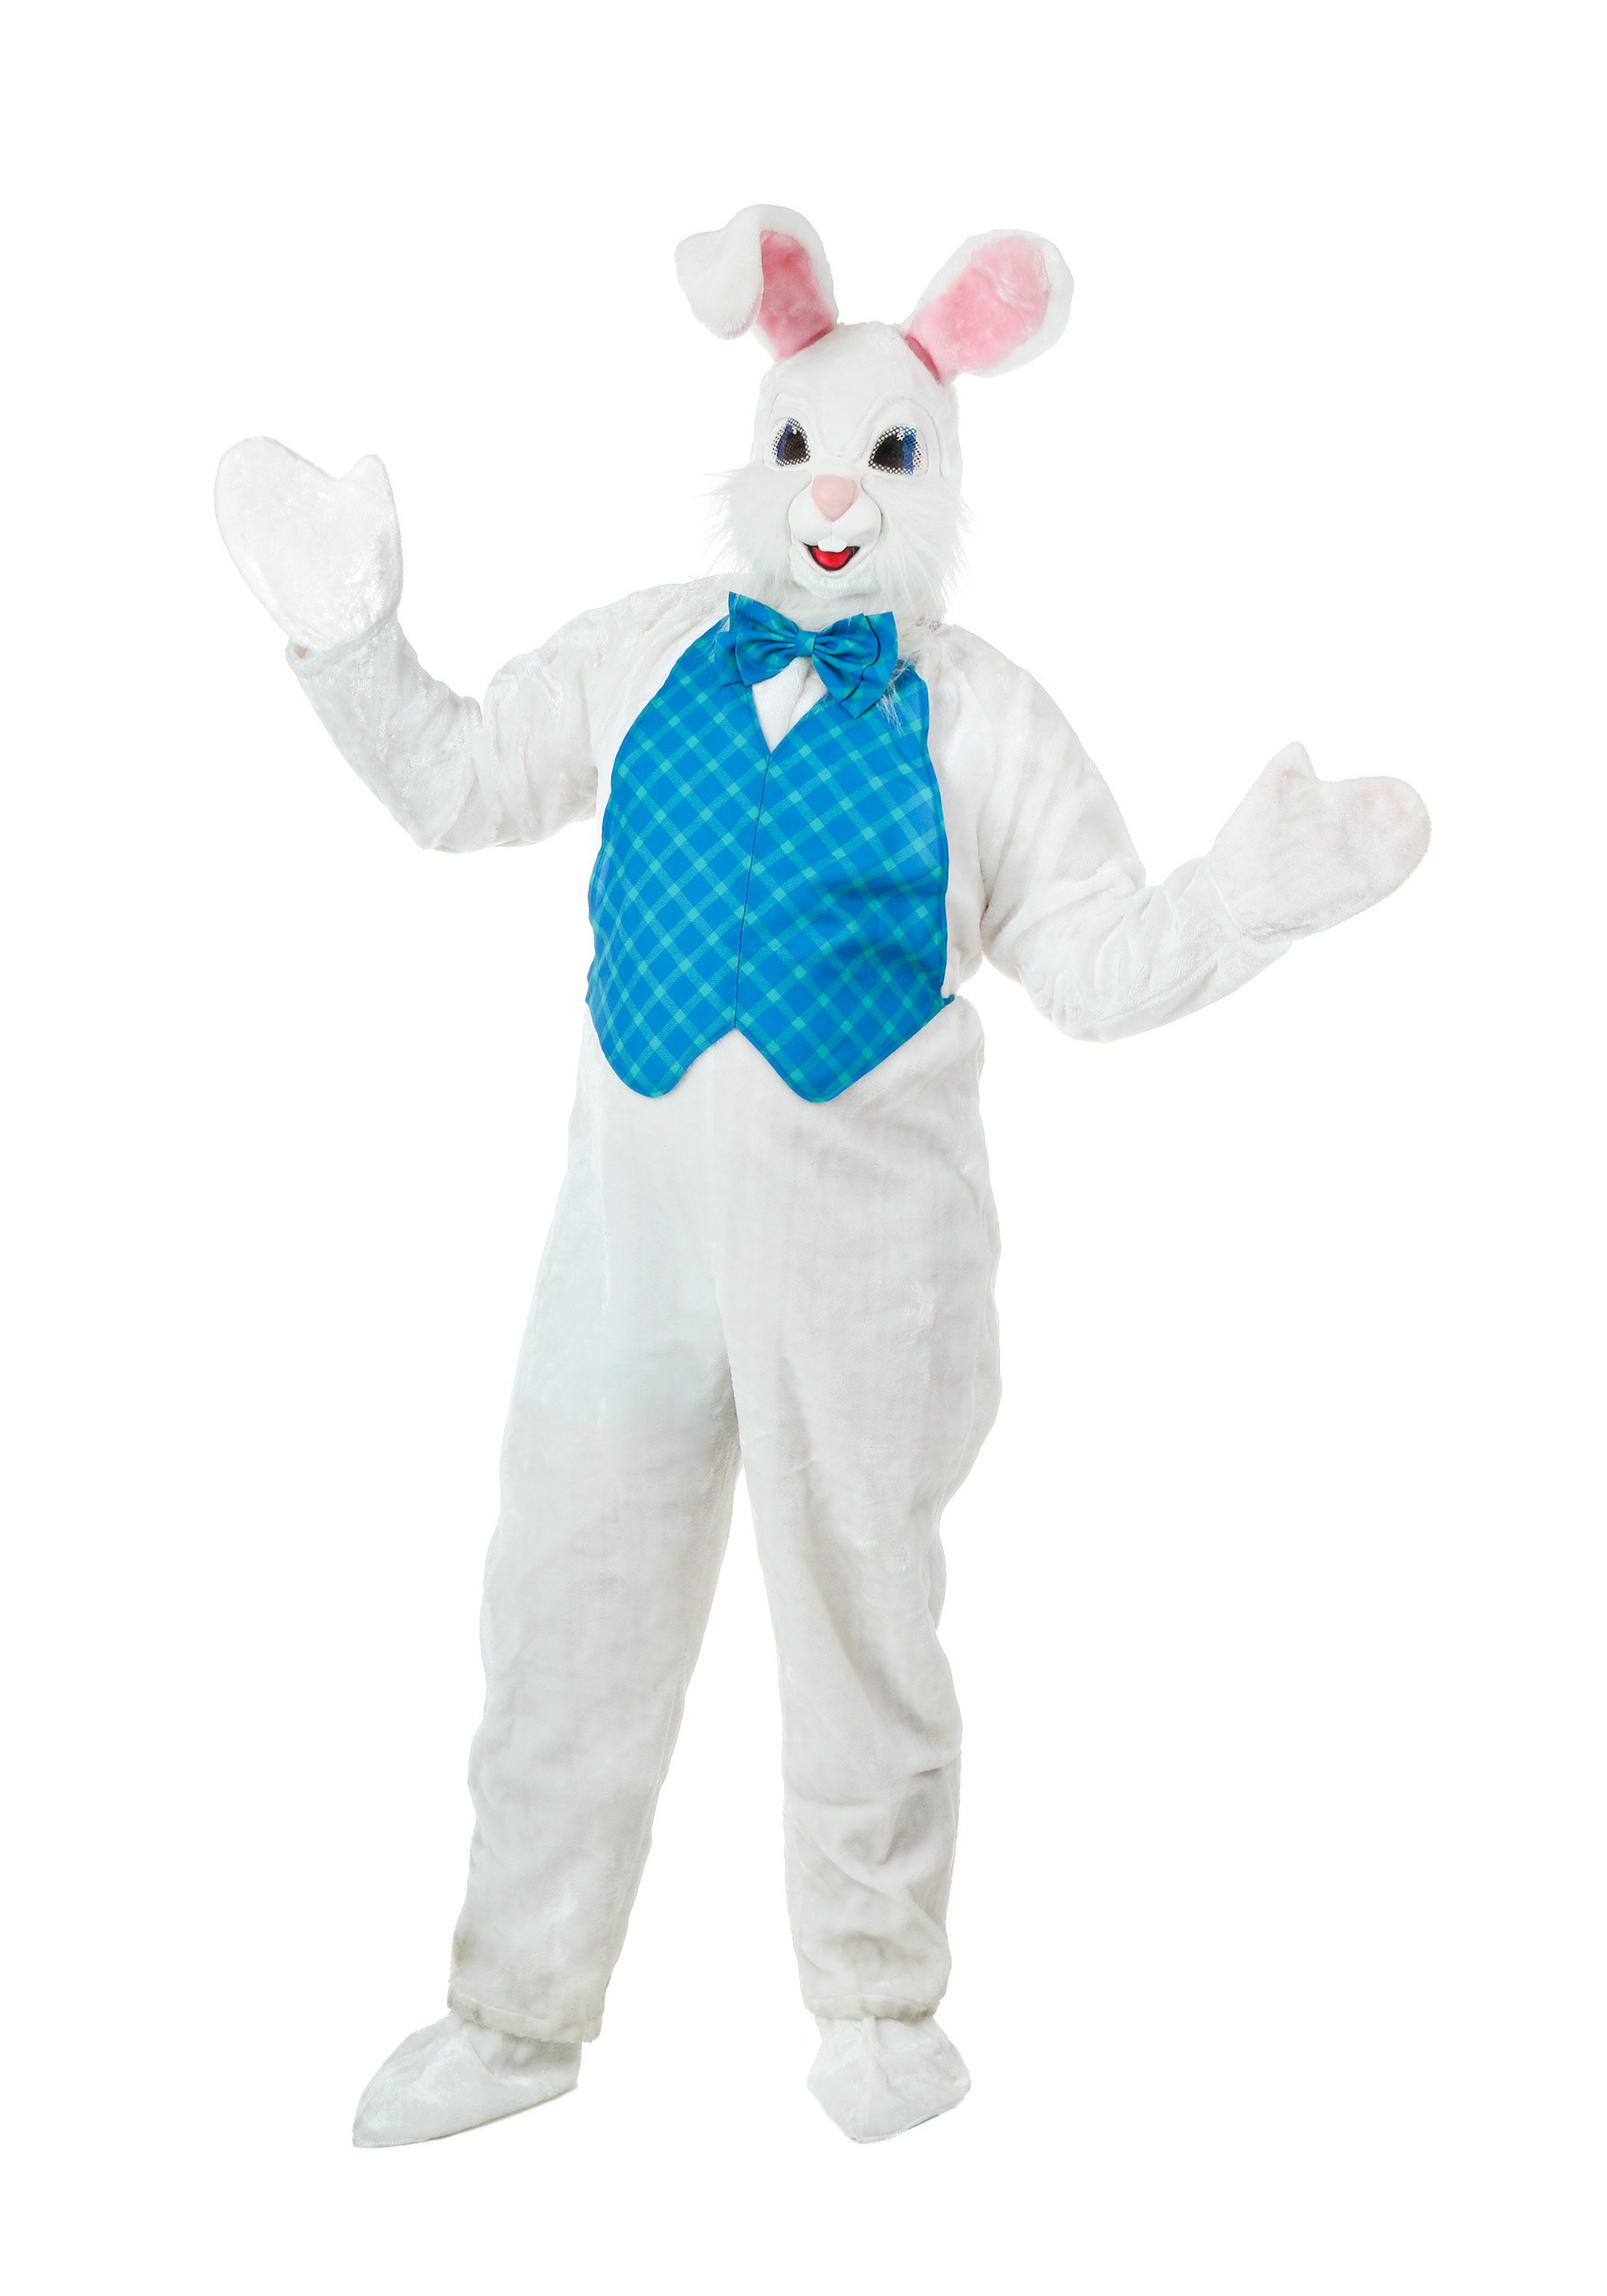 Image of Adult Plus Size Mascot Easter Bunny Costume | Exclusive Easter Costumes ID FUN6047PL-5X